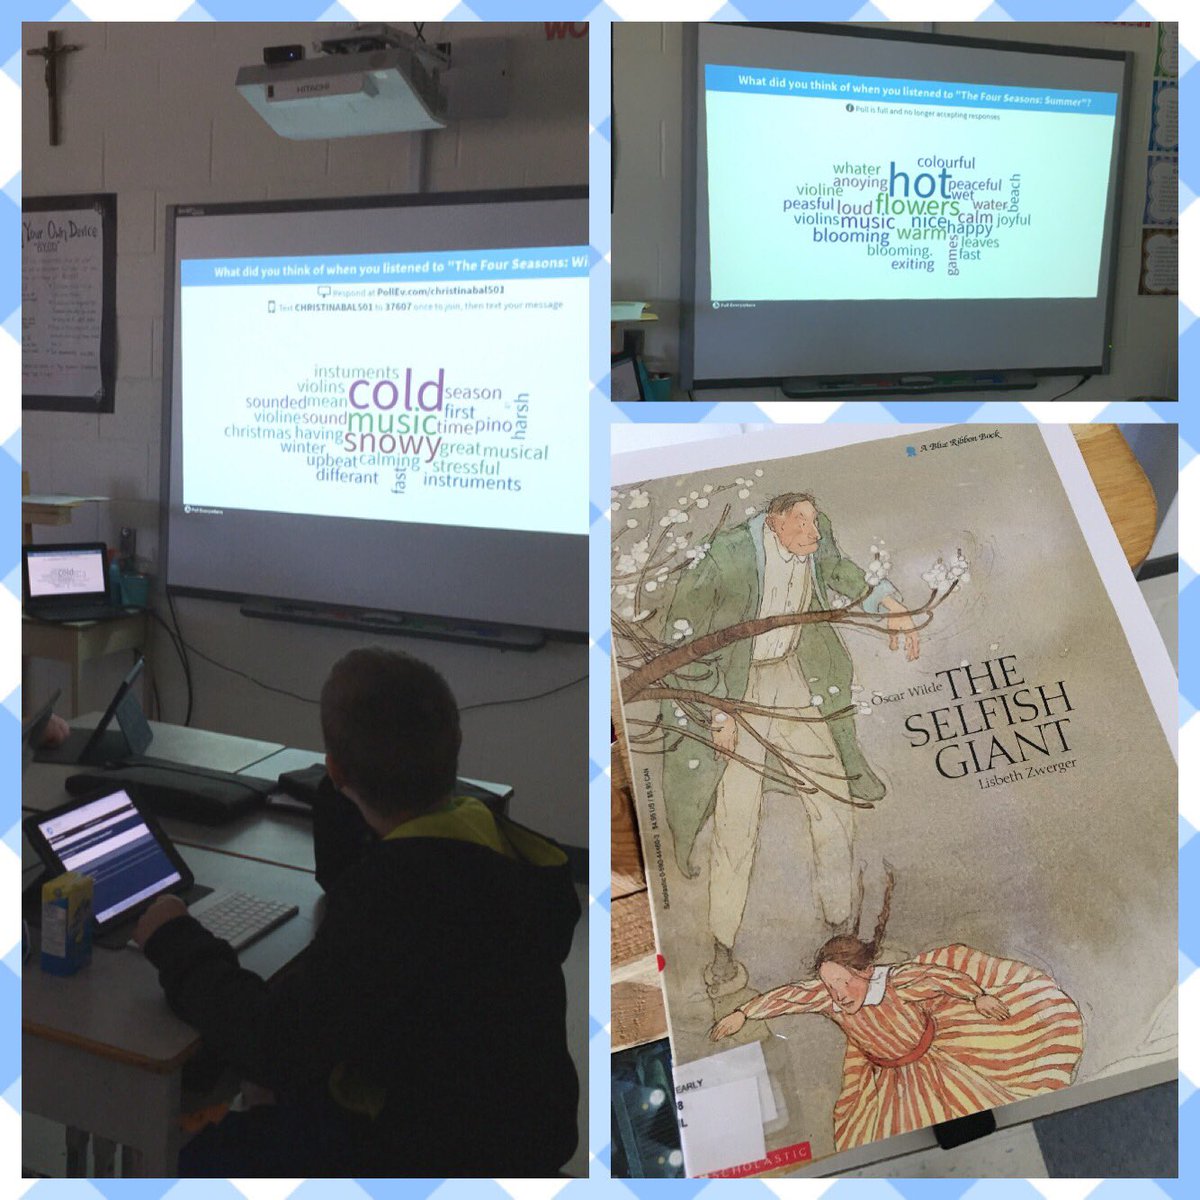 Kicking off Day 1 of #CatholicEdWk with Vivaldi’s “Four Seasons”, @polleverywhere and “The Selfish Giant”. Sharing ideas in real-time and reflecting on the meaning of redemption and God’s promise. #FaithInAction @ALCDSB @CatholicEdu